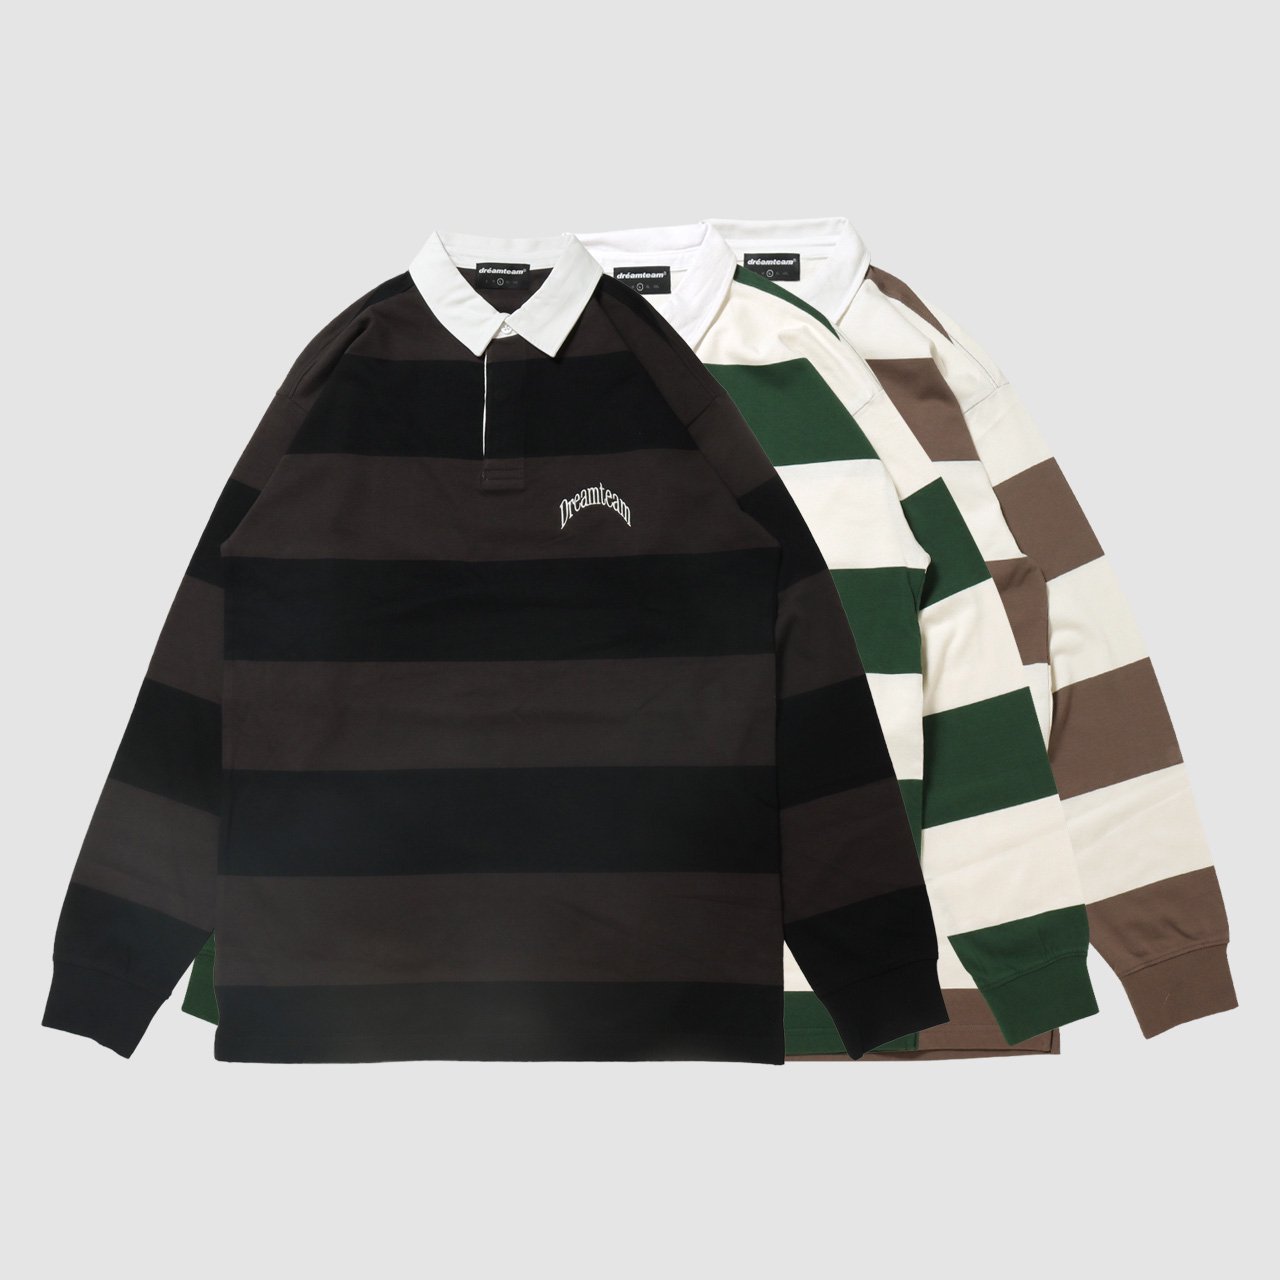 <img class='new_mark_img1' src='https://img.shop-pro.jp/img/new/icons20.gif' style='border:none;display:inline;margin:0px;padding:0px;width:auto;' />Dreamteam Arch logo Rugby Stripe Jersey